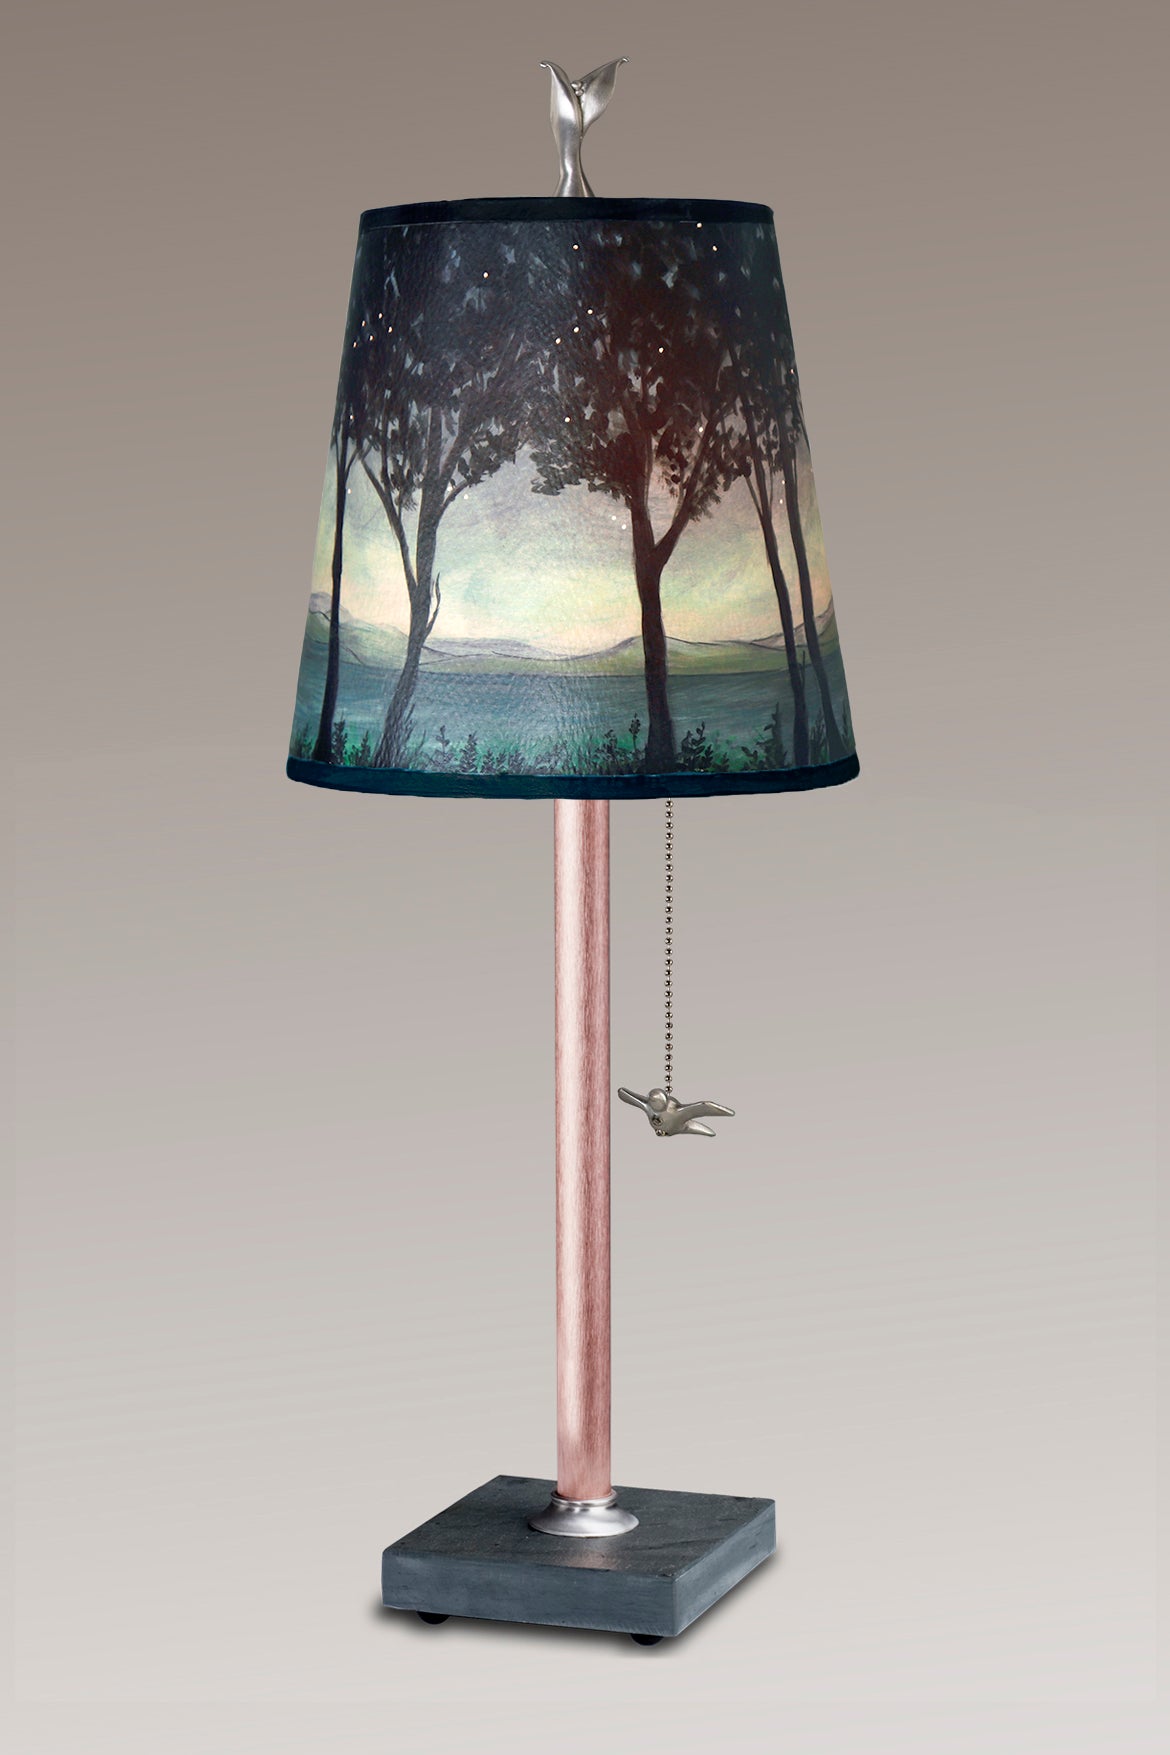 Janna Ugone &amp; Co Table Lamps Copper Table Lamp with Small Drum in Twilight